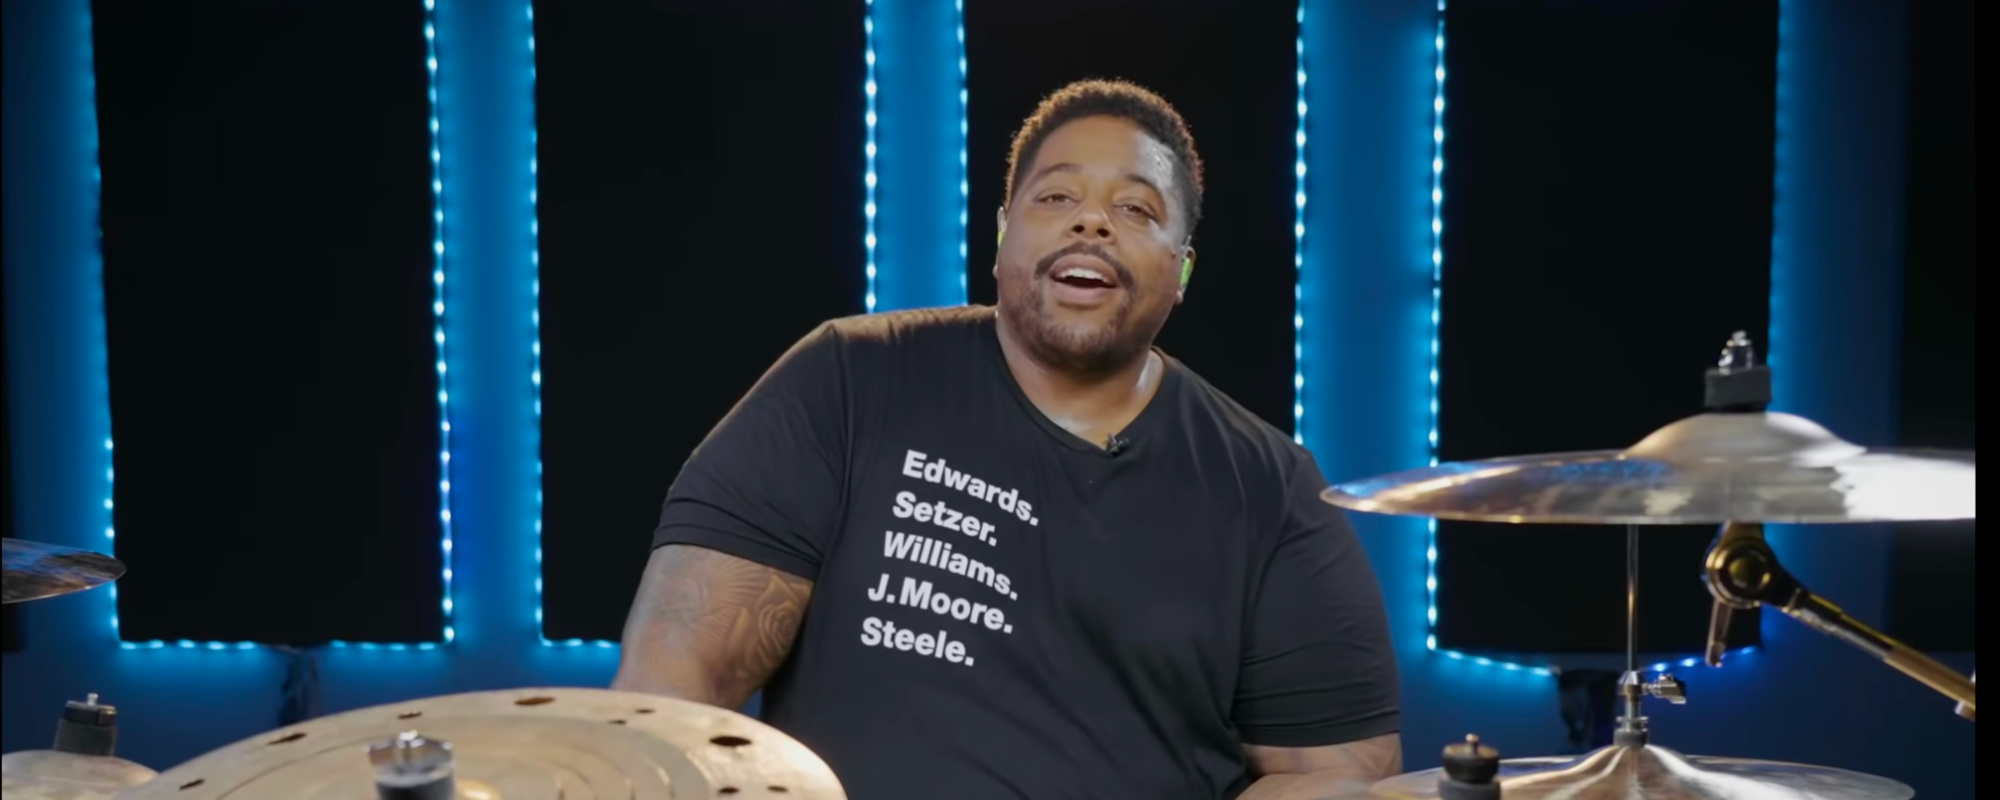 Aaron Spears, Drummer for Usher, Ariana Grande & Others, Dead at 47